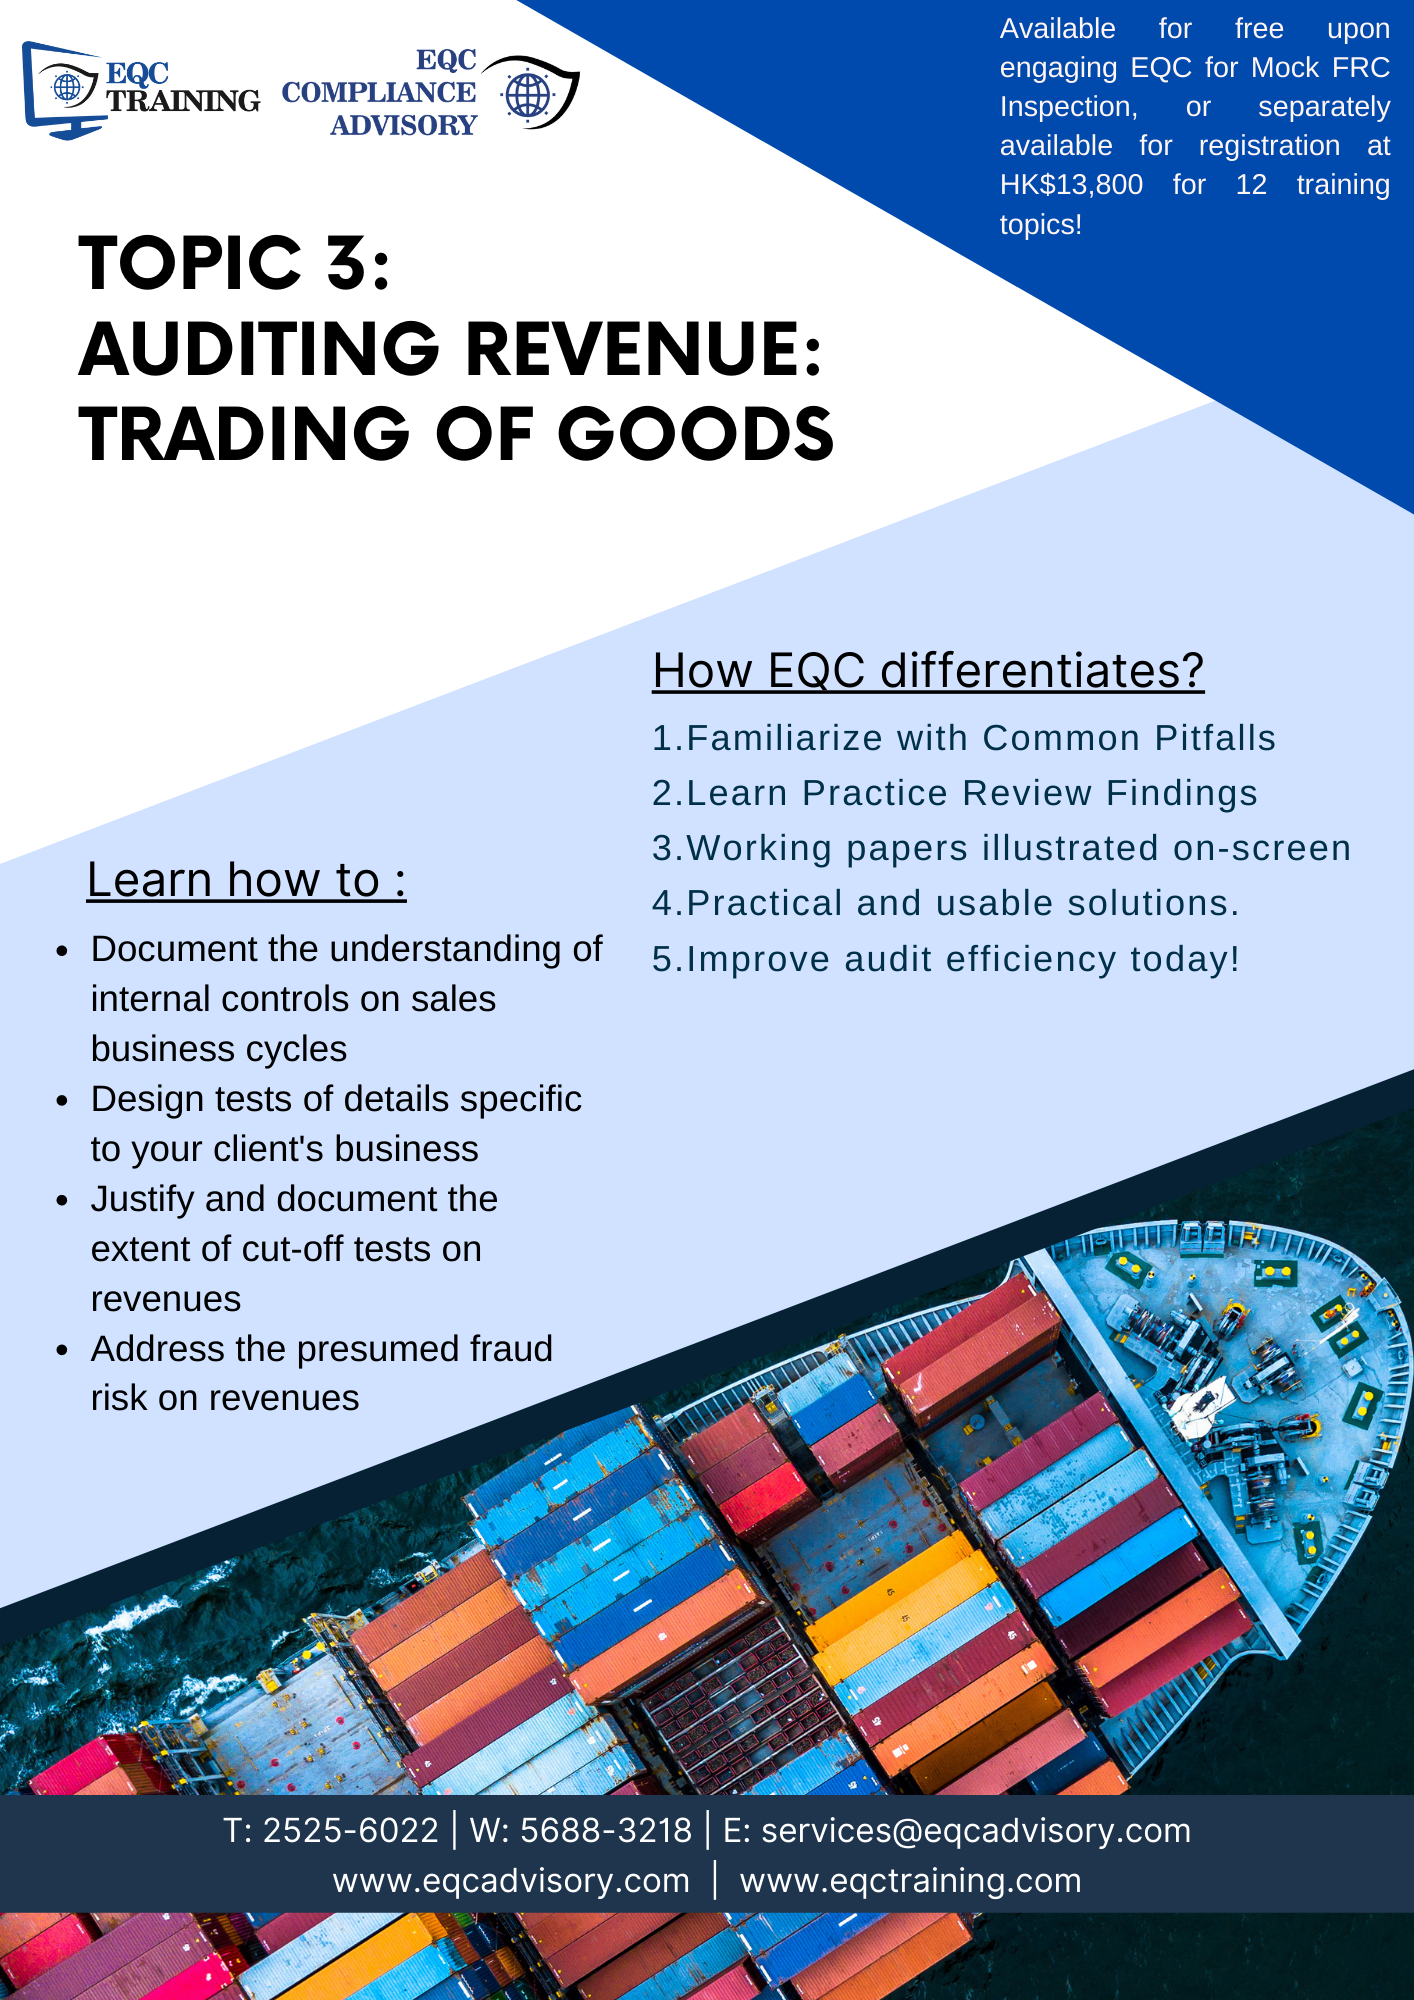 003 Auditing Revenue: Trading of Goods